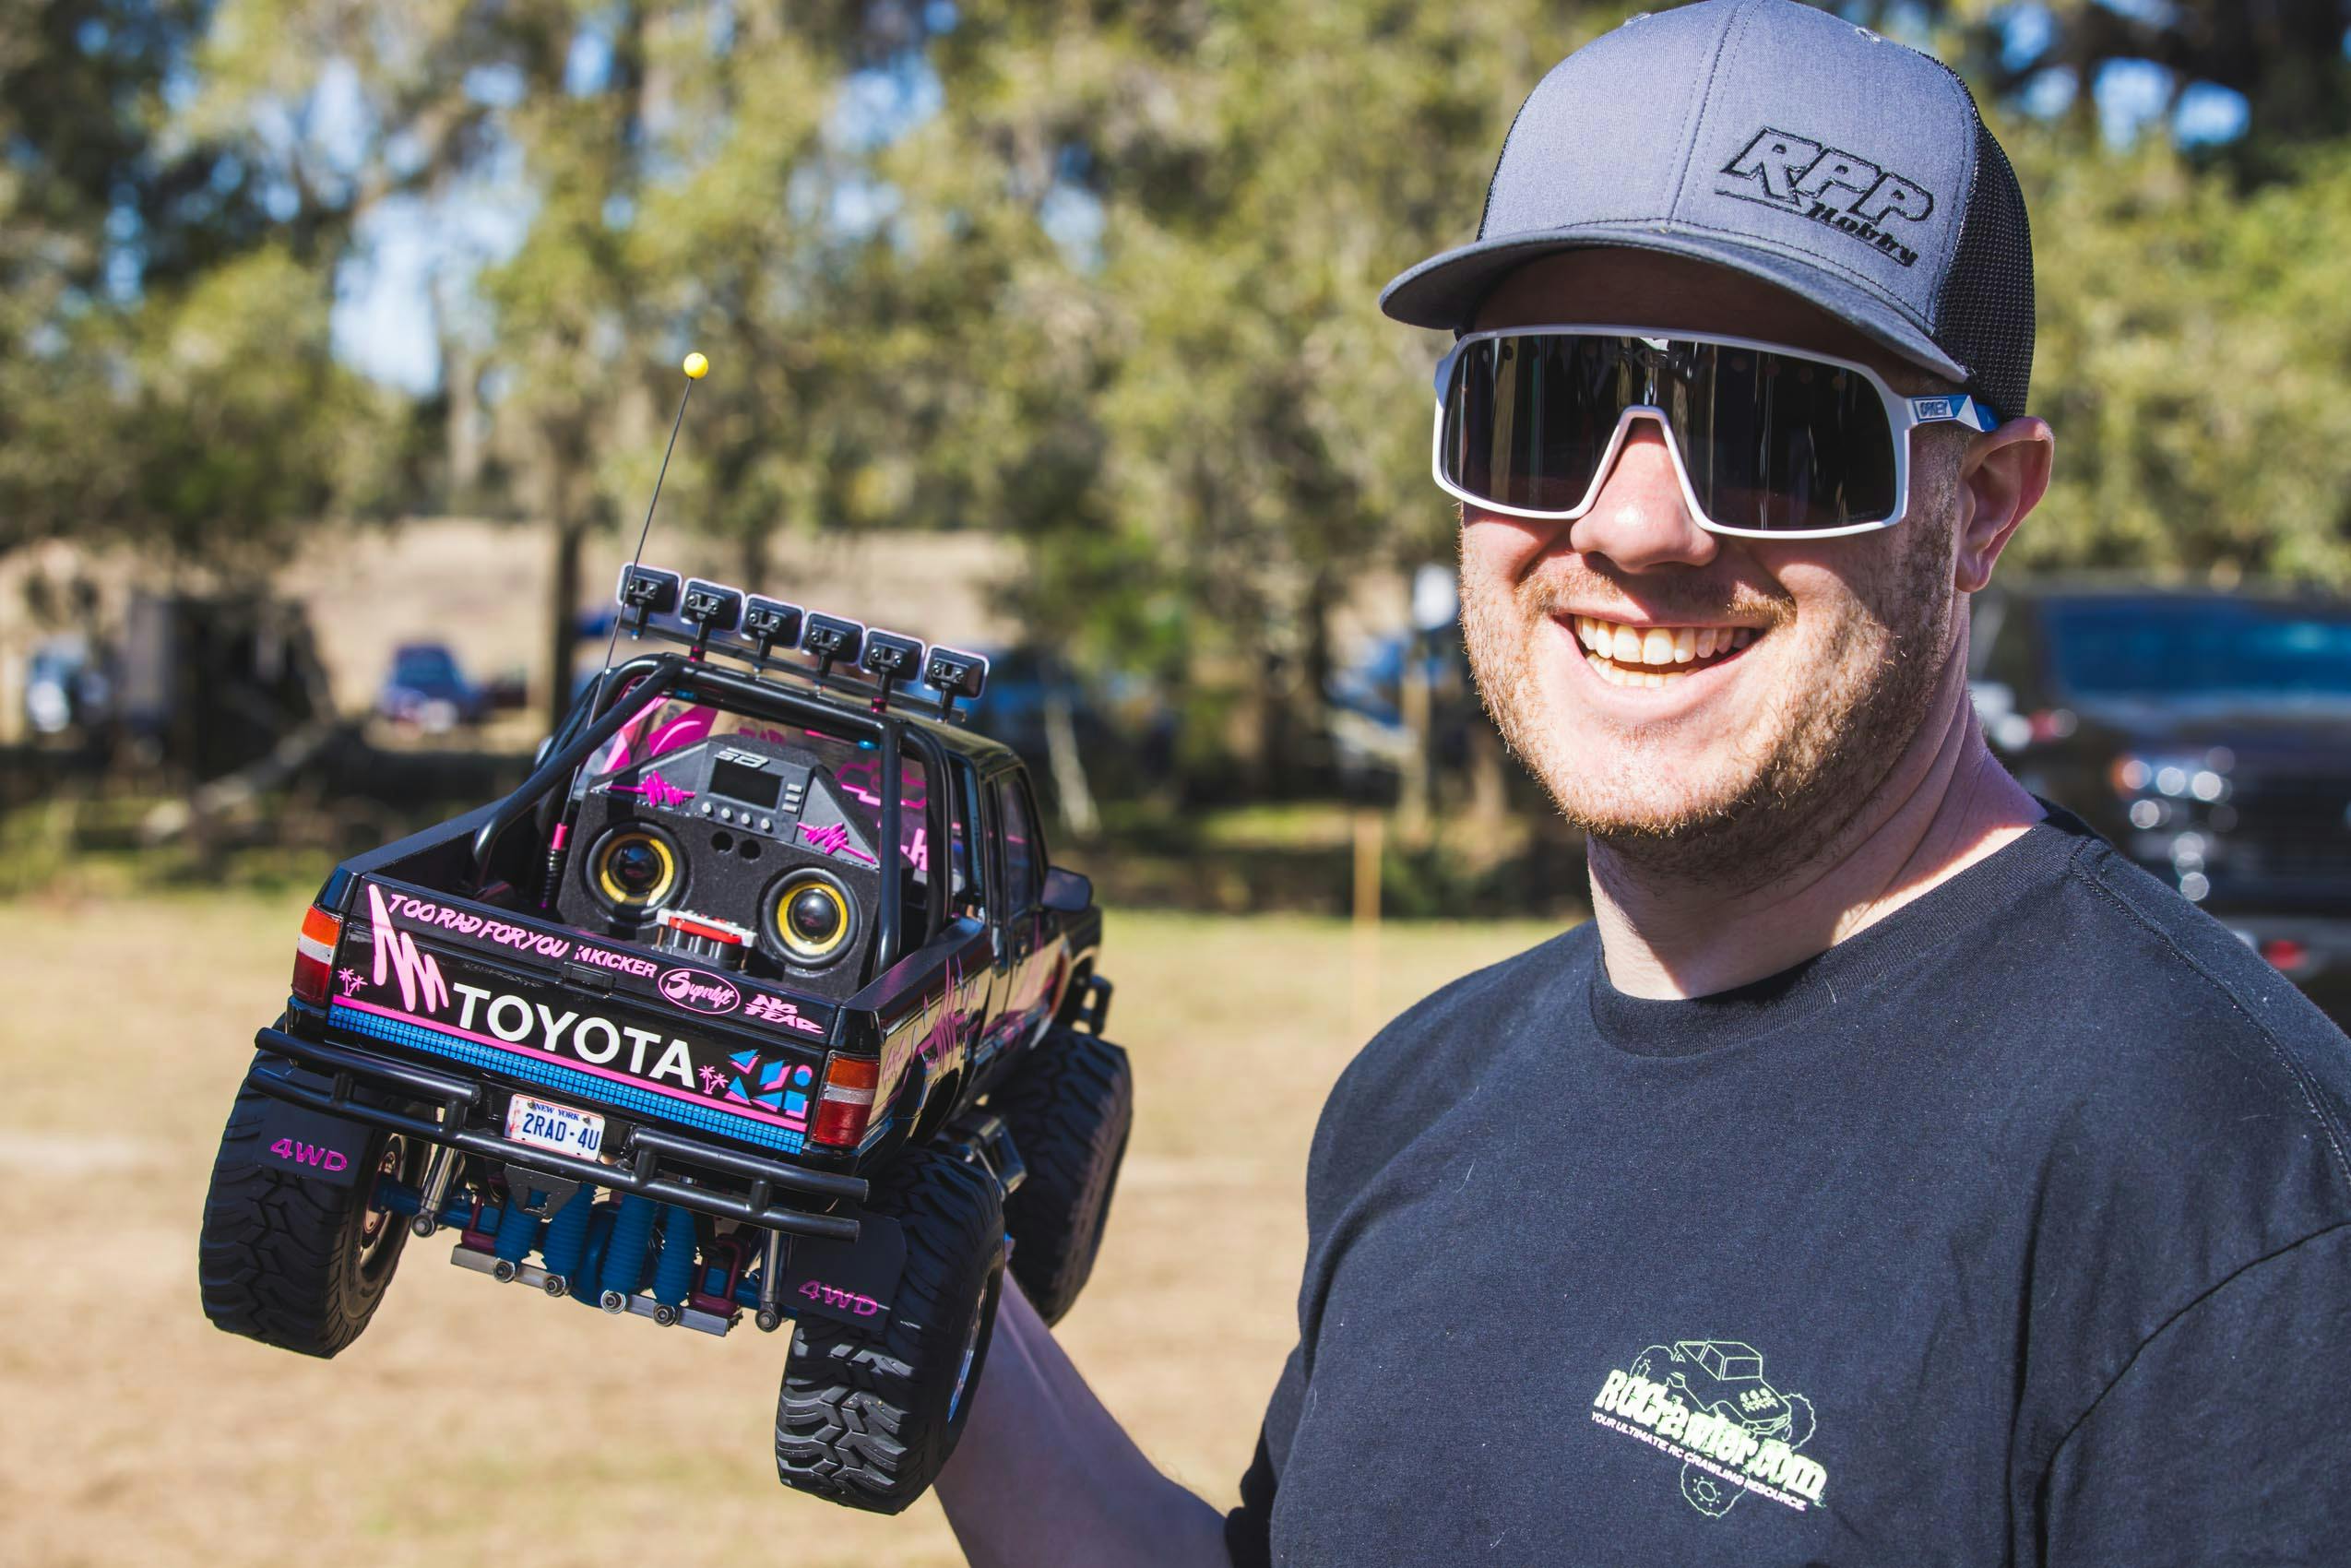 Scale RC Crawlers Mike Lohmann with Too Rad best in show